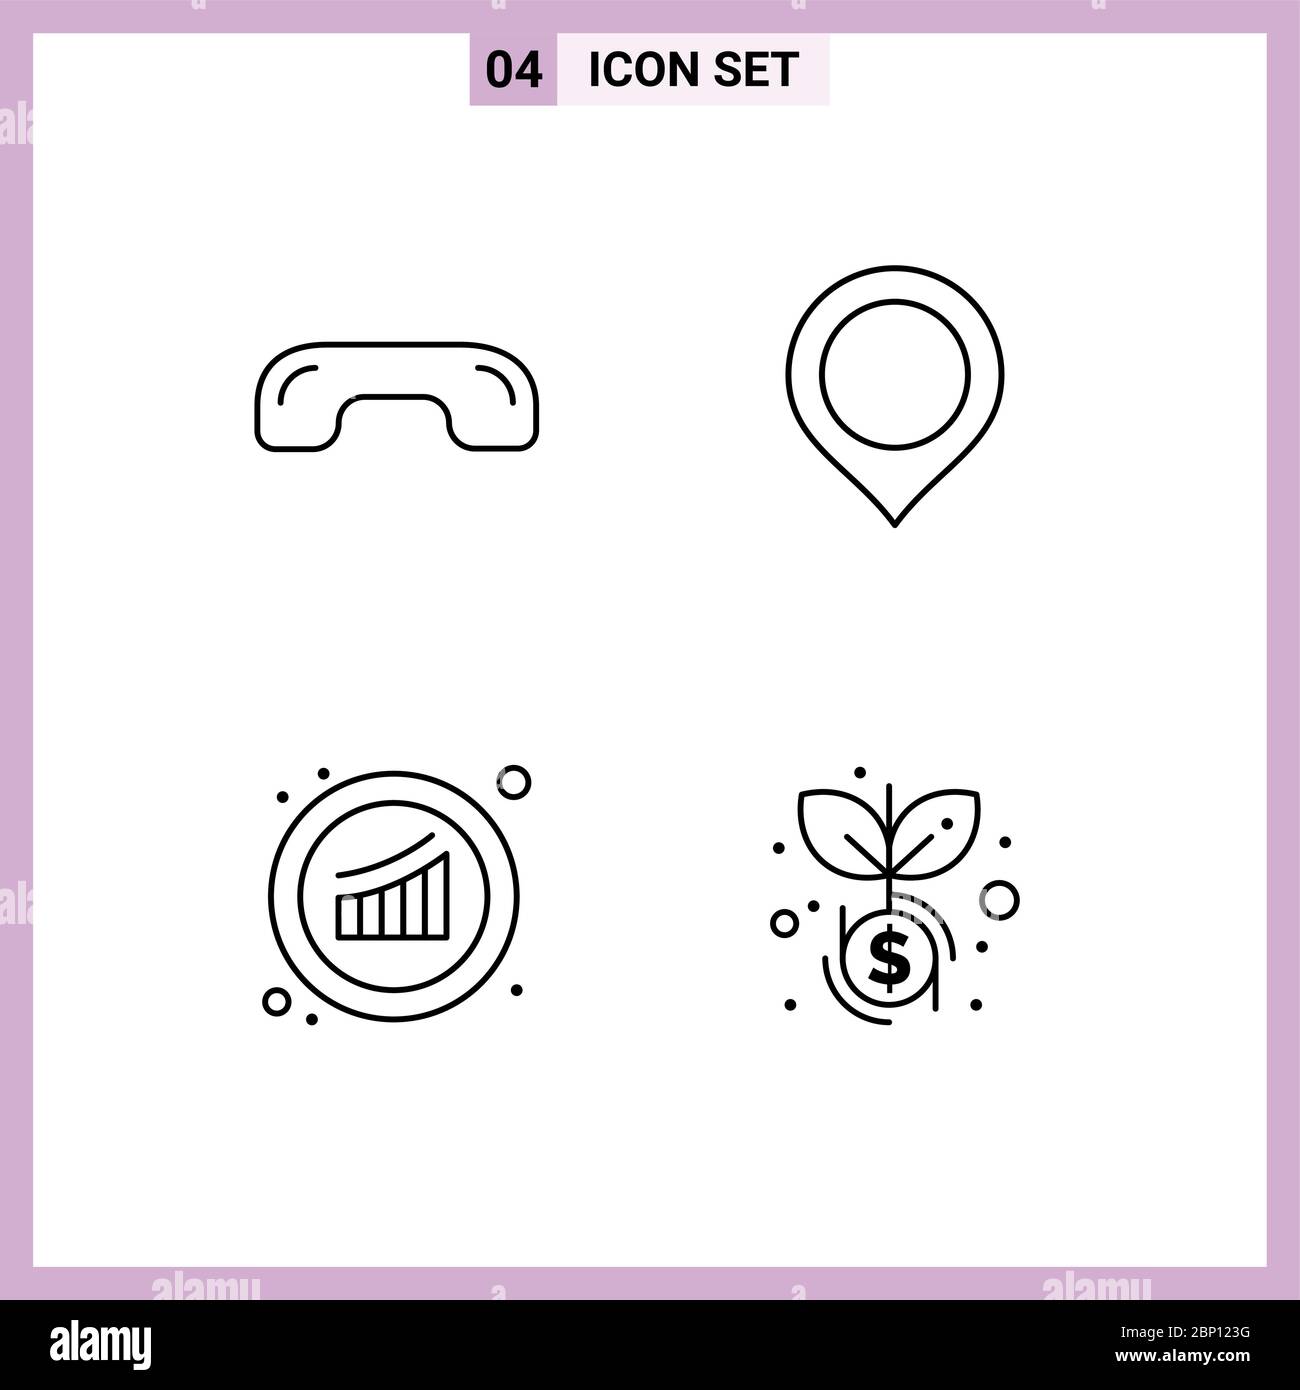 Mobile Interface Line Set of 4 Pictograms of decline, graph, phone, map, marketing Editable Vector Design Elements Stock Vector